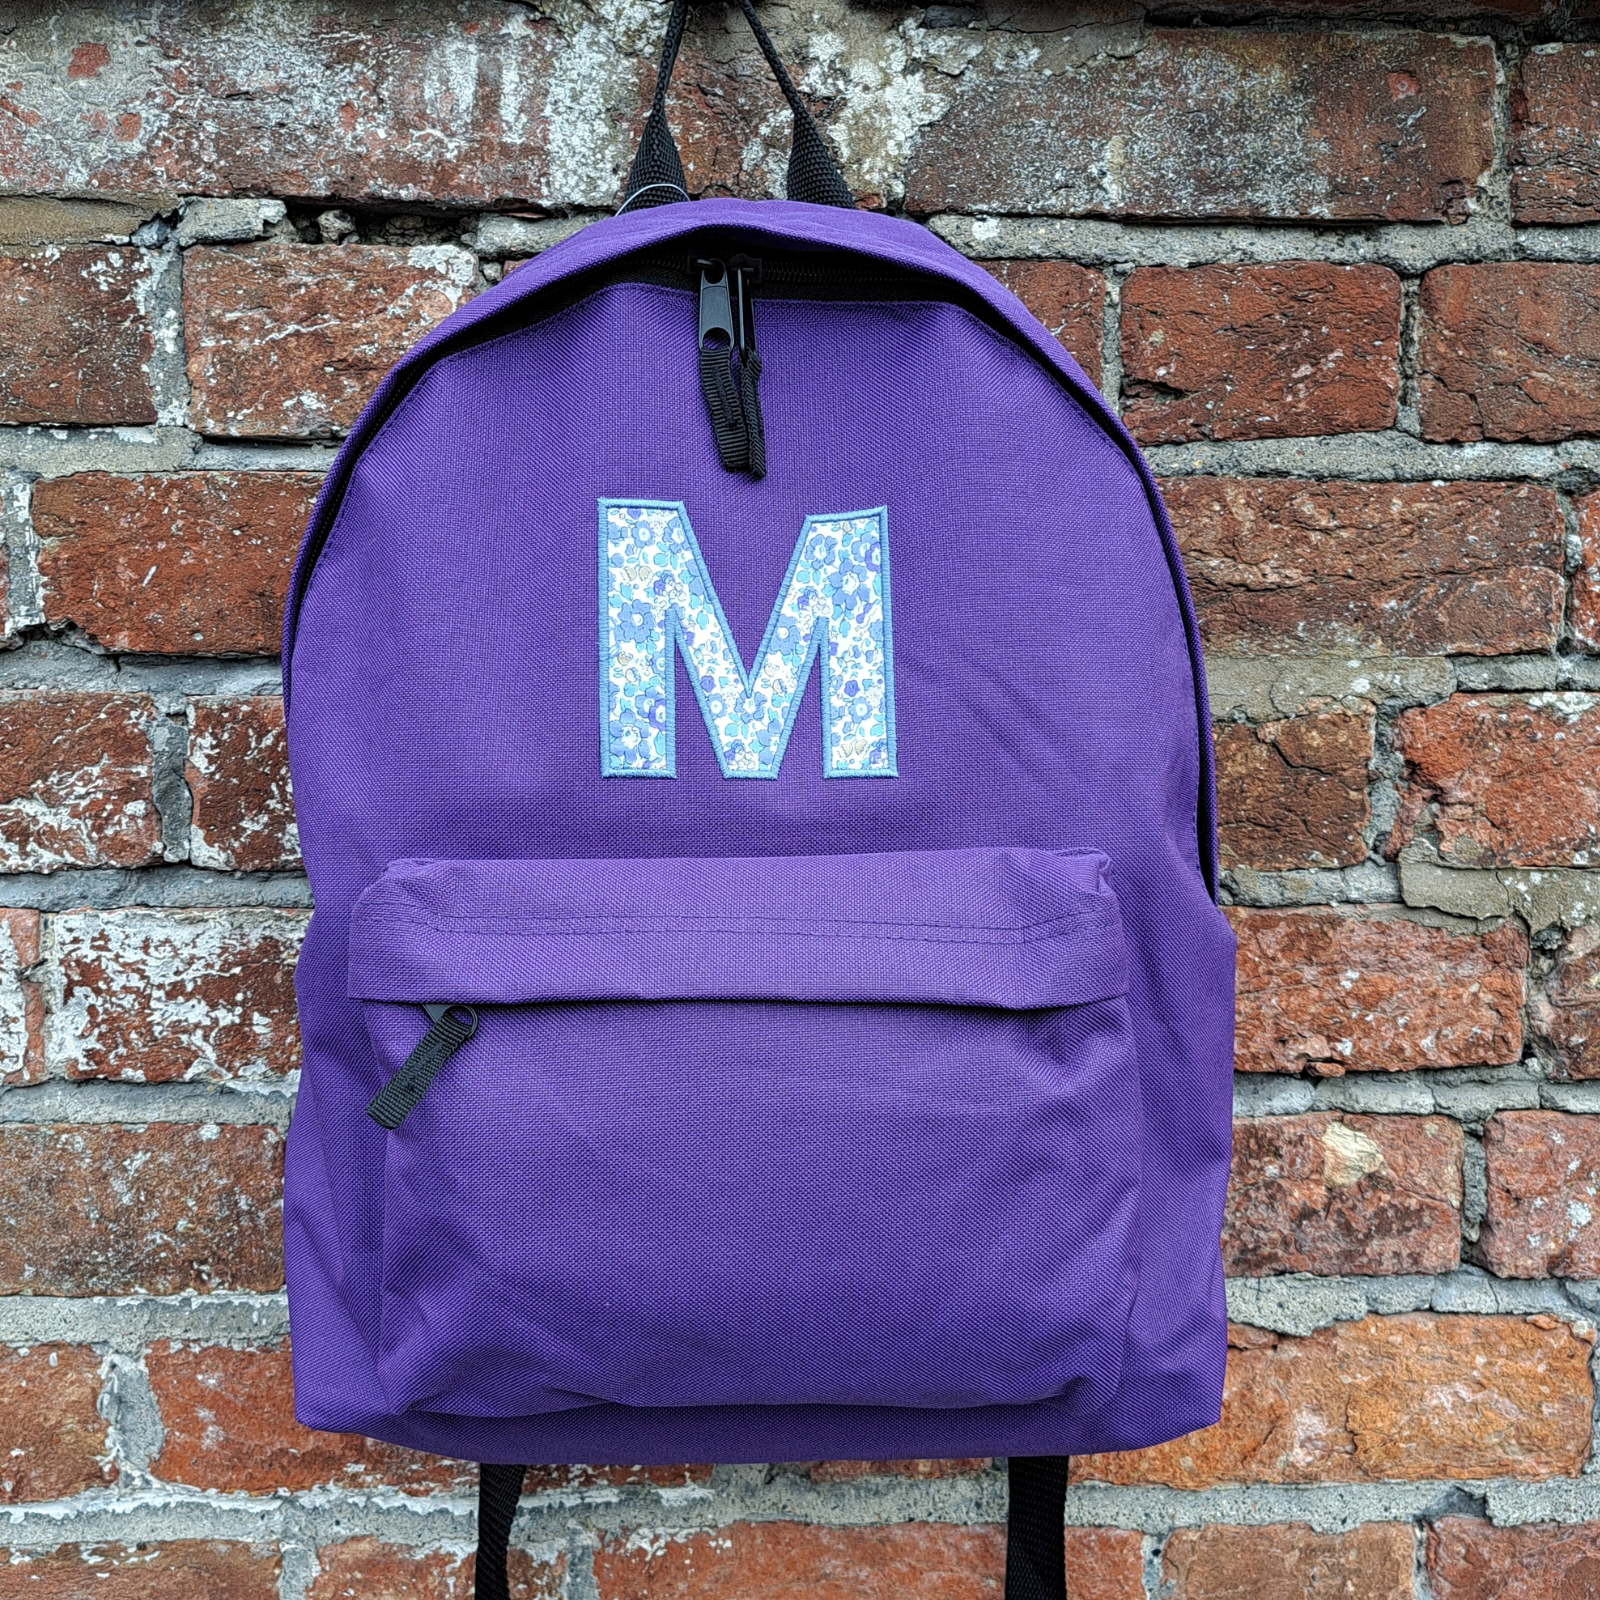 Image of a purple school backpack that has been personalised on the front with an initial M in Liberty of London fabric which is appliqued onto the bag with blue coordinating embroidery thread. The bag has a zipped main compartment and a smaller zipped pocket on the front along with two adjustable back straps.